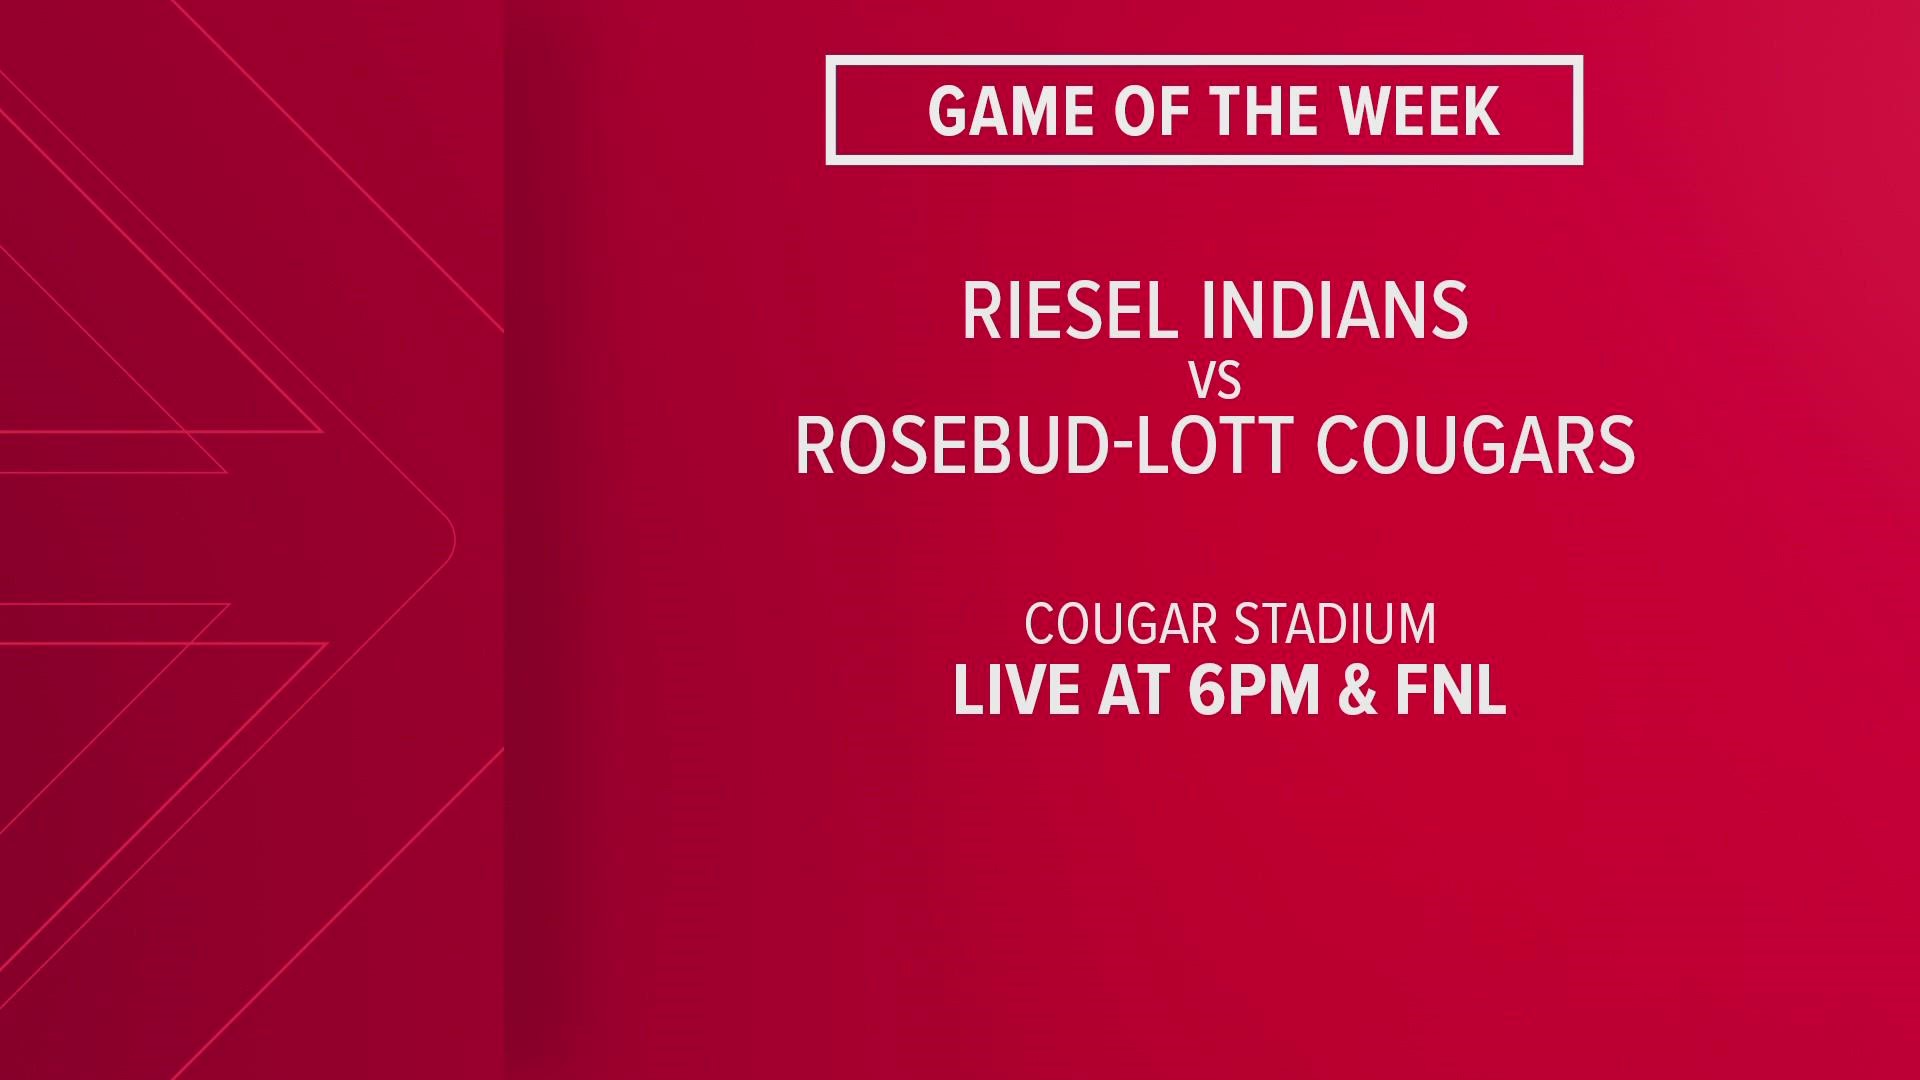 The Rosebud-Lott Cougars will host the Riesel Indians